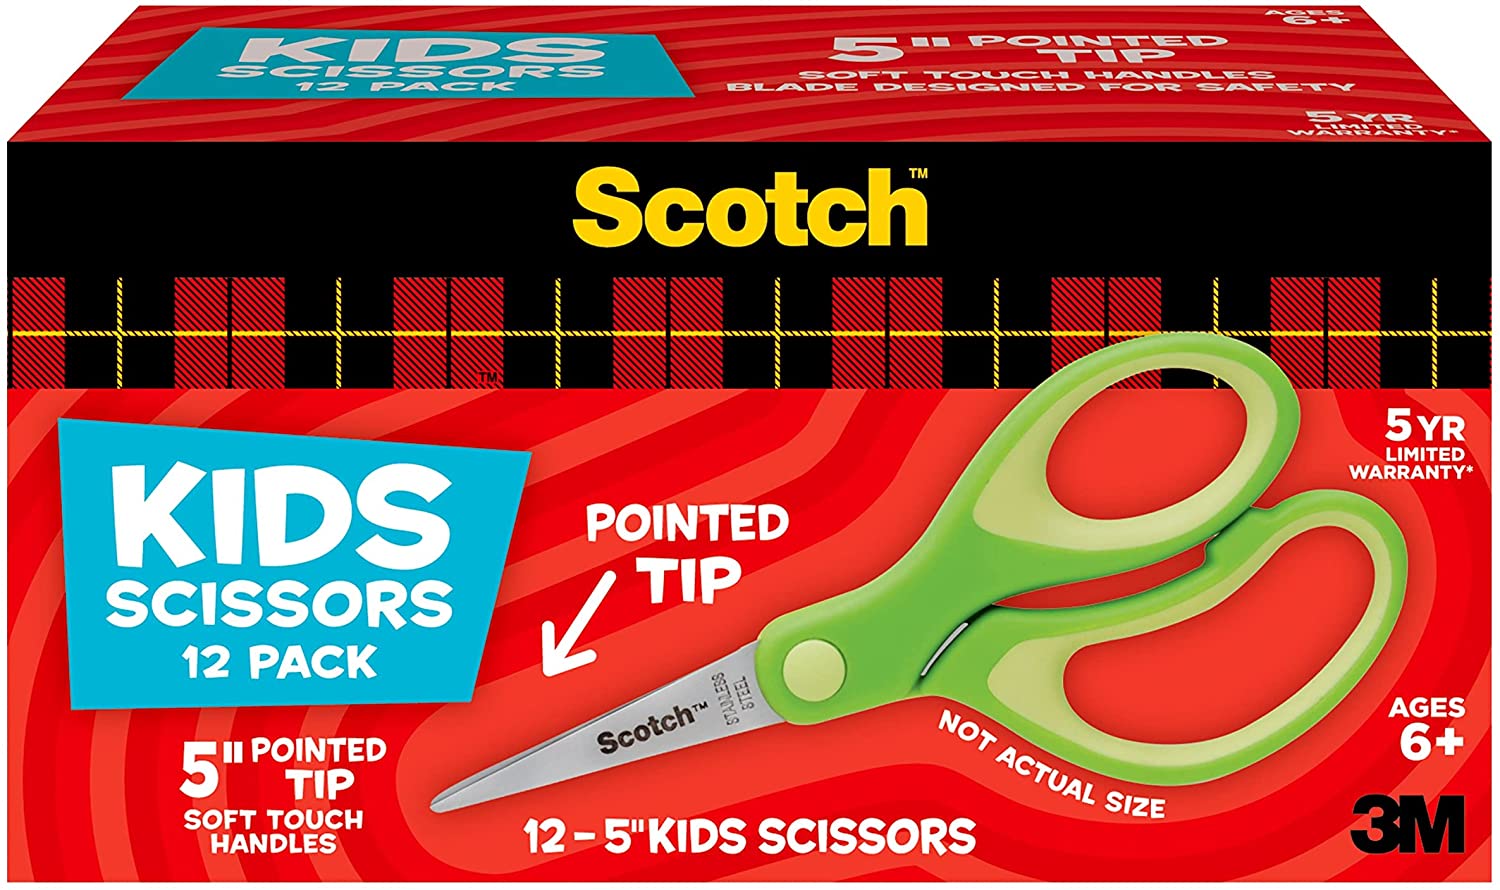 https://www.dontwasteyourmoney.com/wp-content/uploads/2021/08/scotch-left-right-hand-safety-5-inch-students-scissors-12-count.jpg